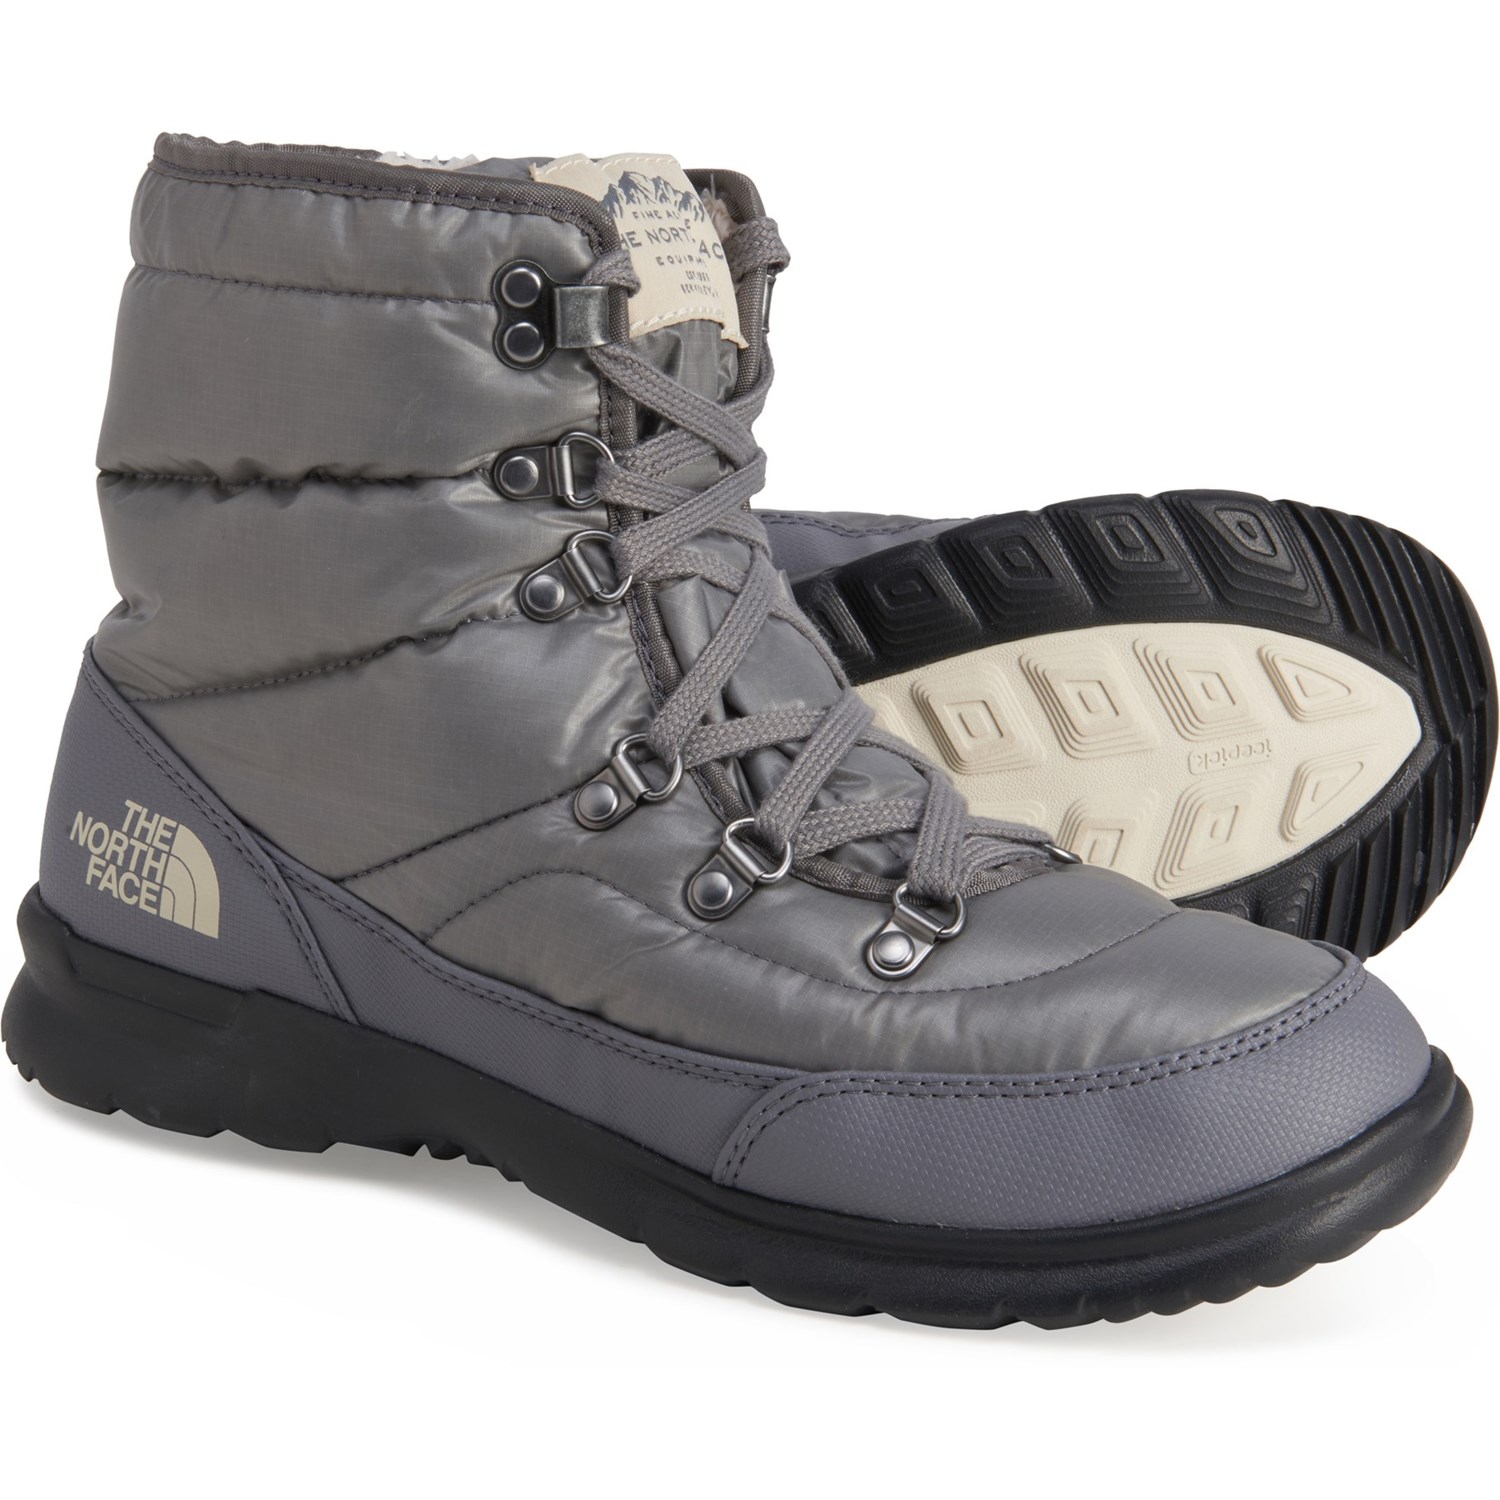 women's thermoball boots